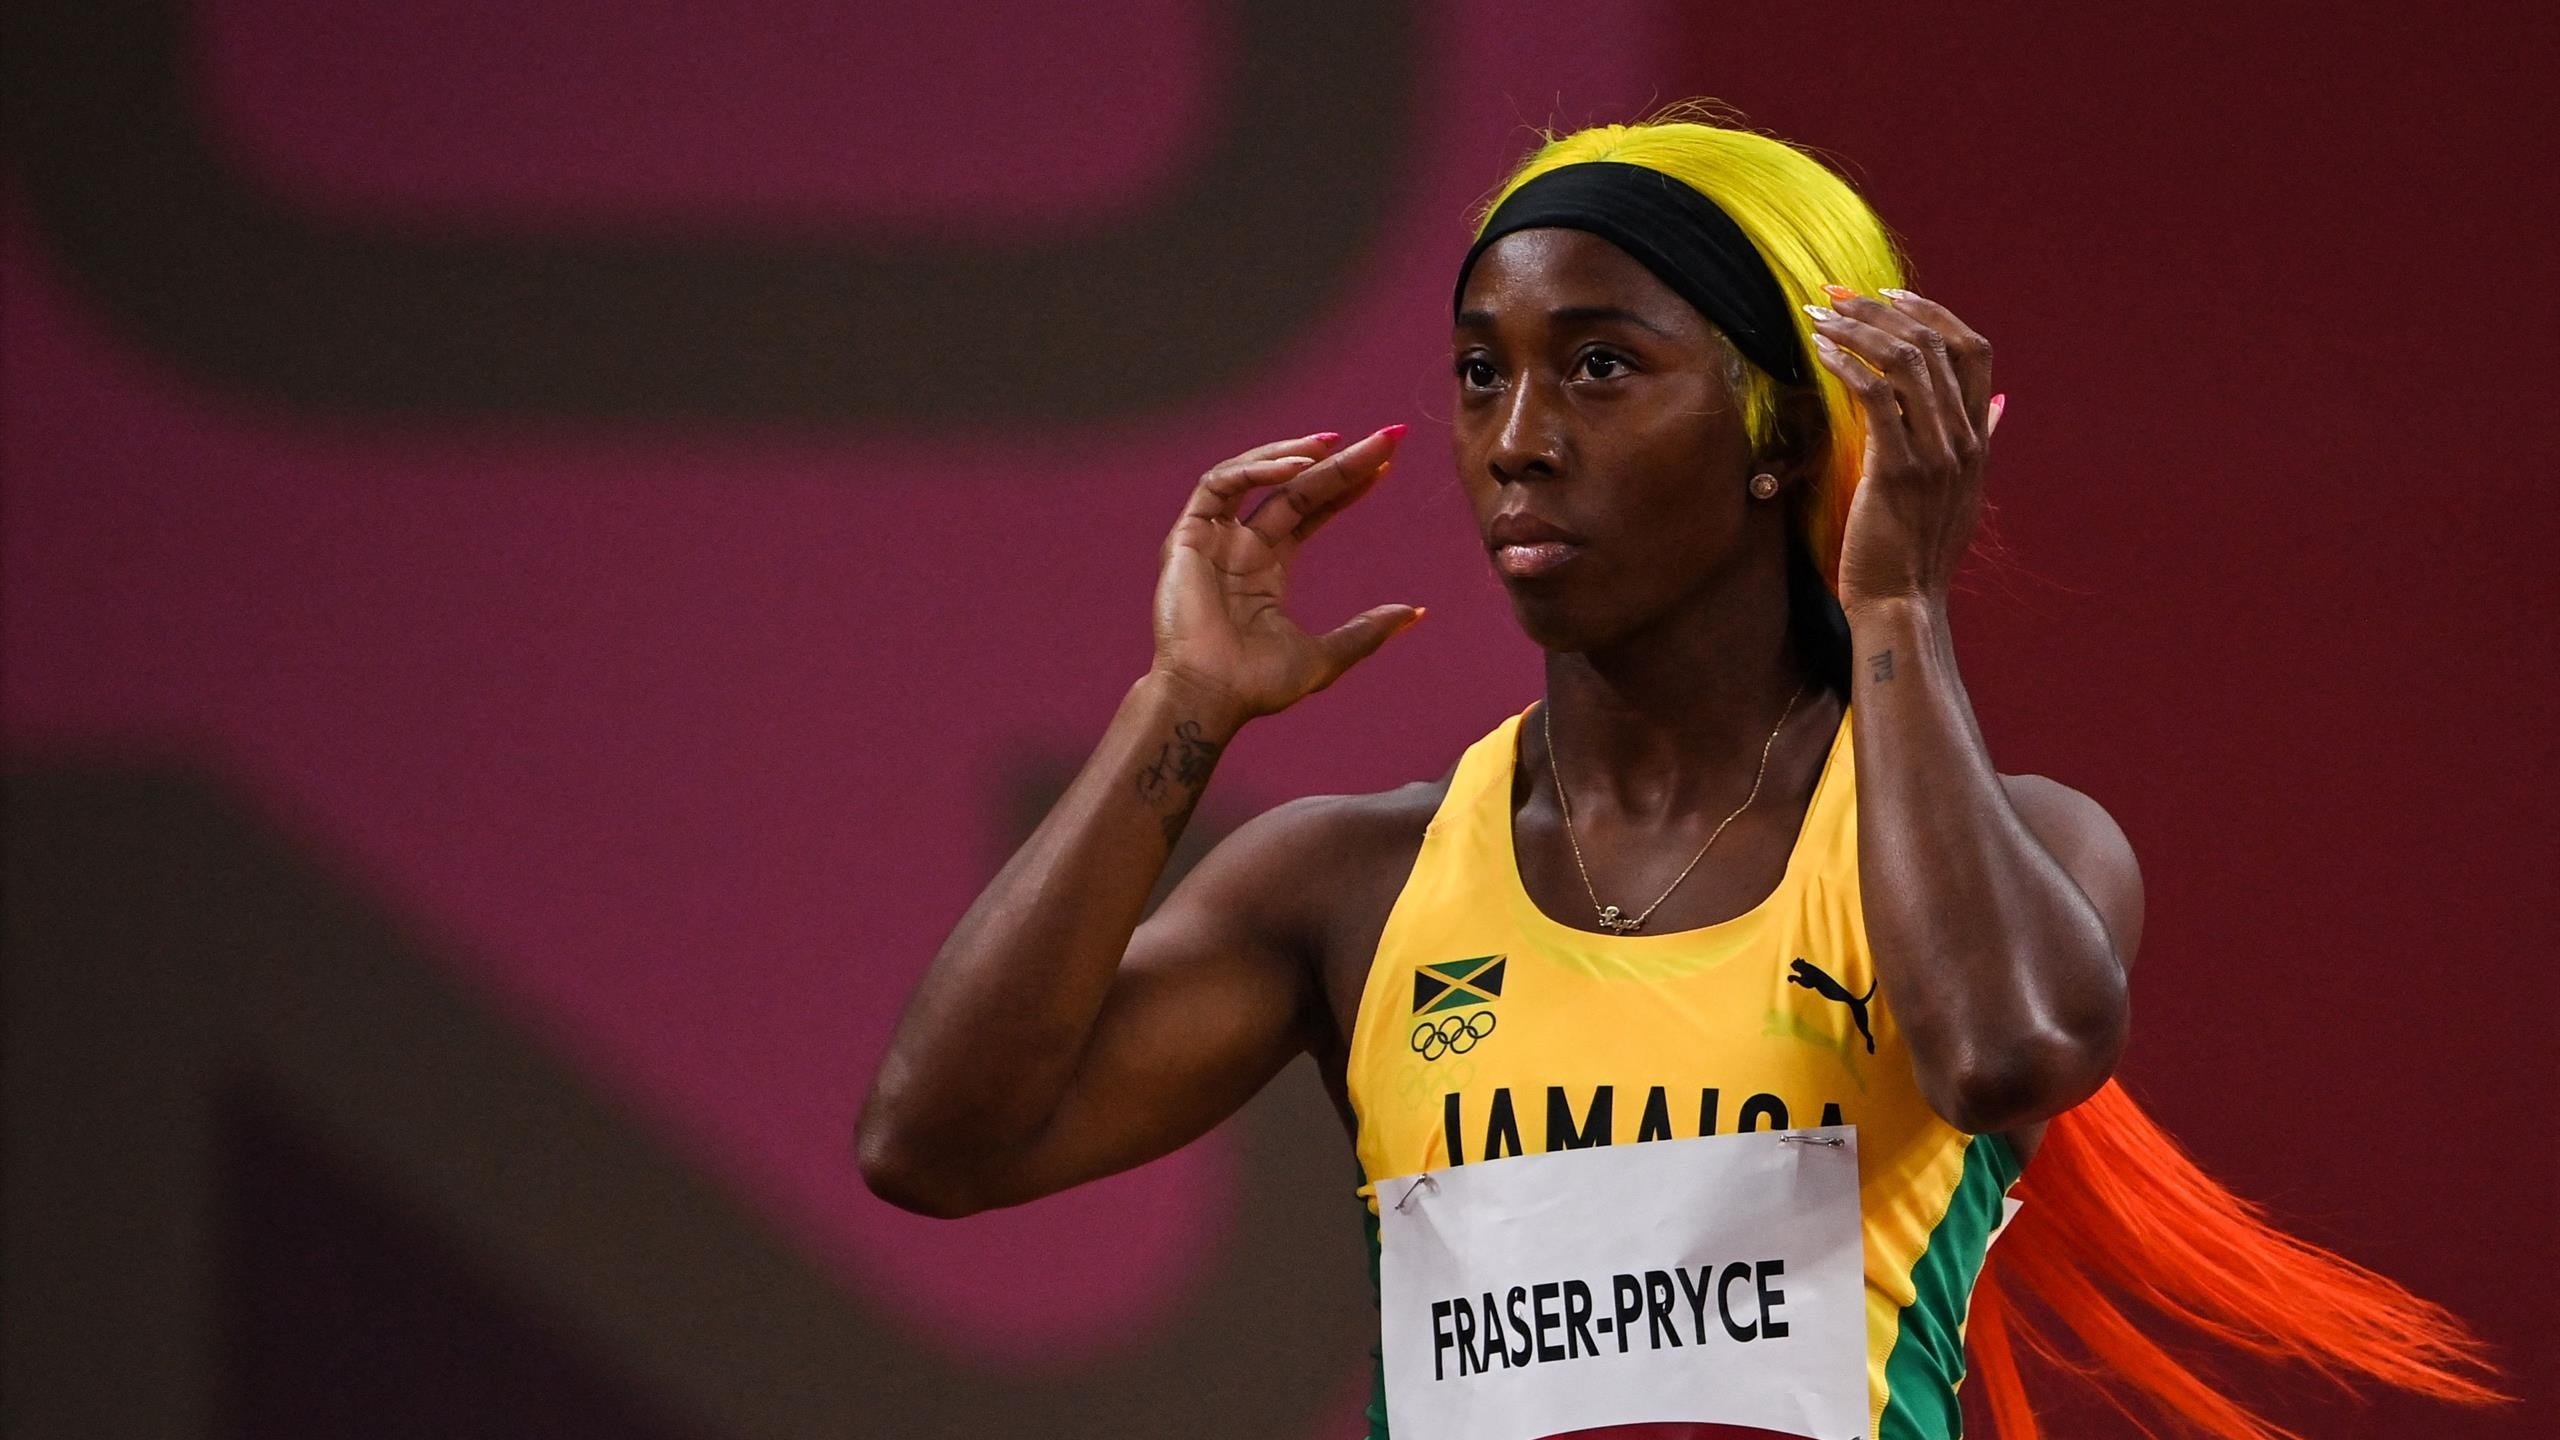 Shelly-Ann Fraser-Pryce, Vision of excellence, Athletic marvel, Daily Sabah, 2560x1440 HD Desktop